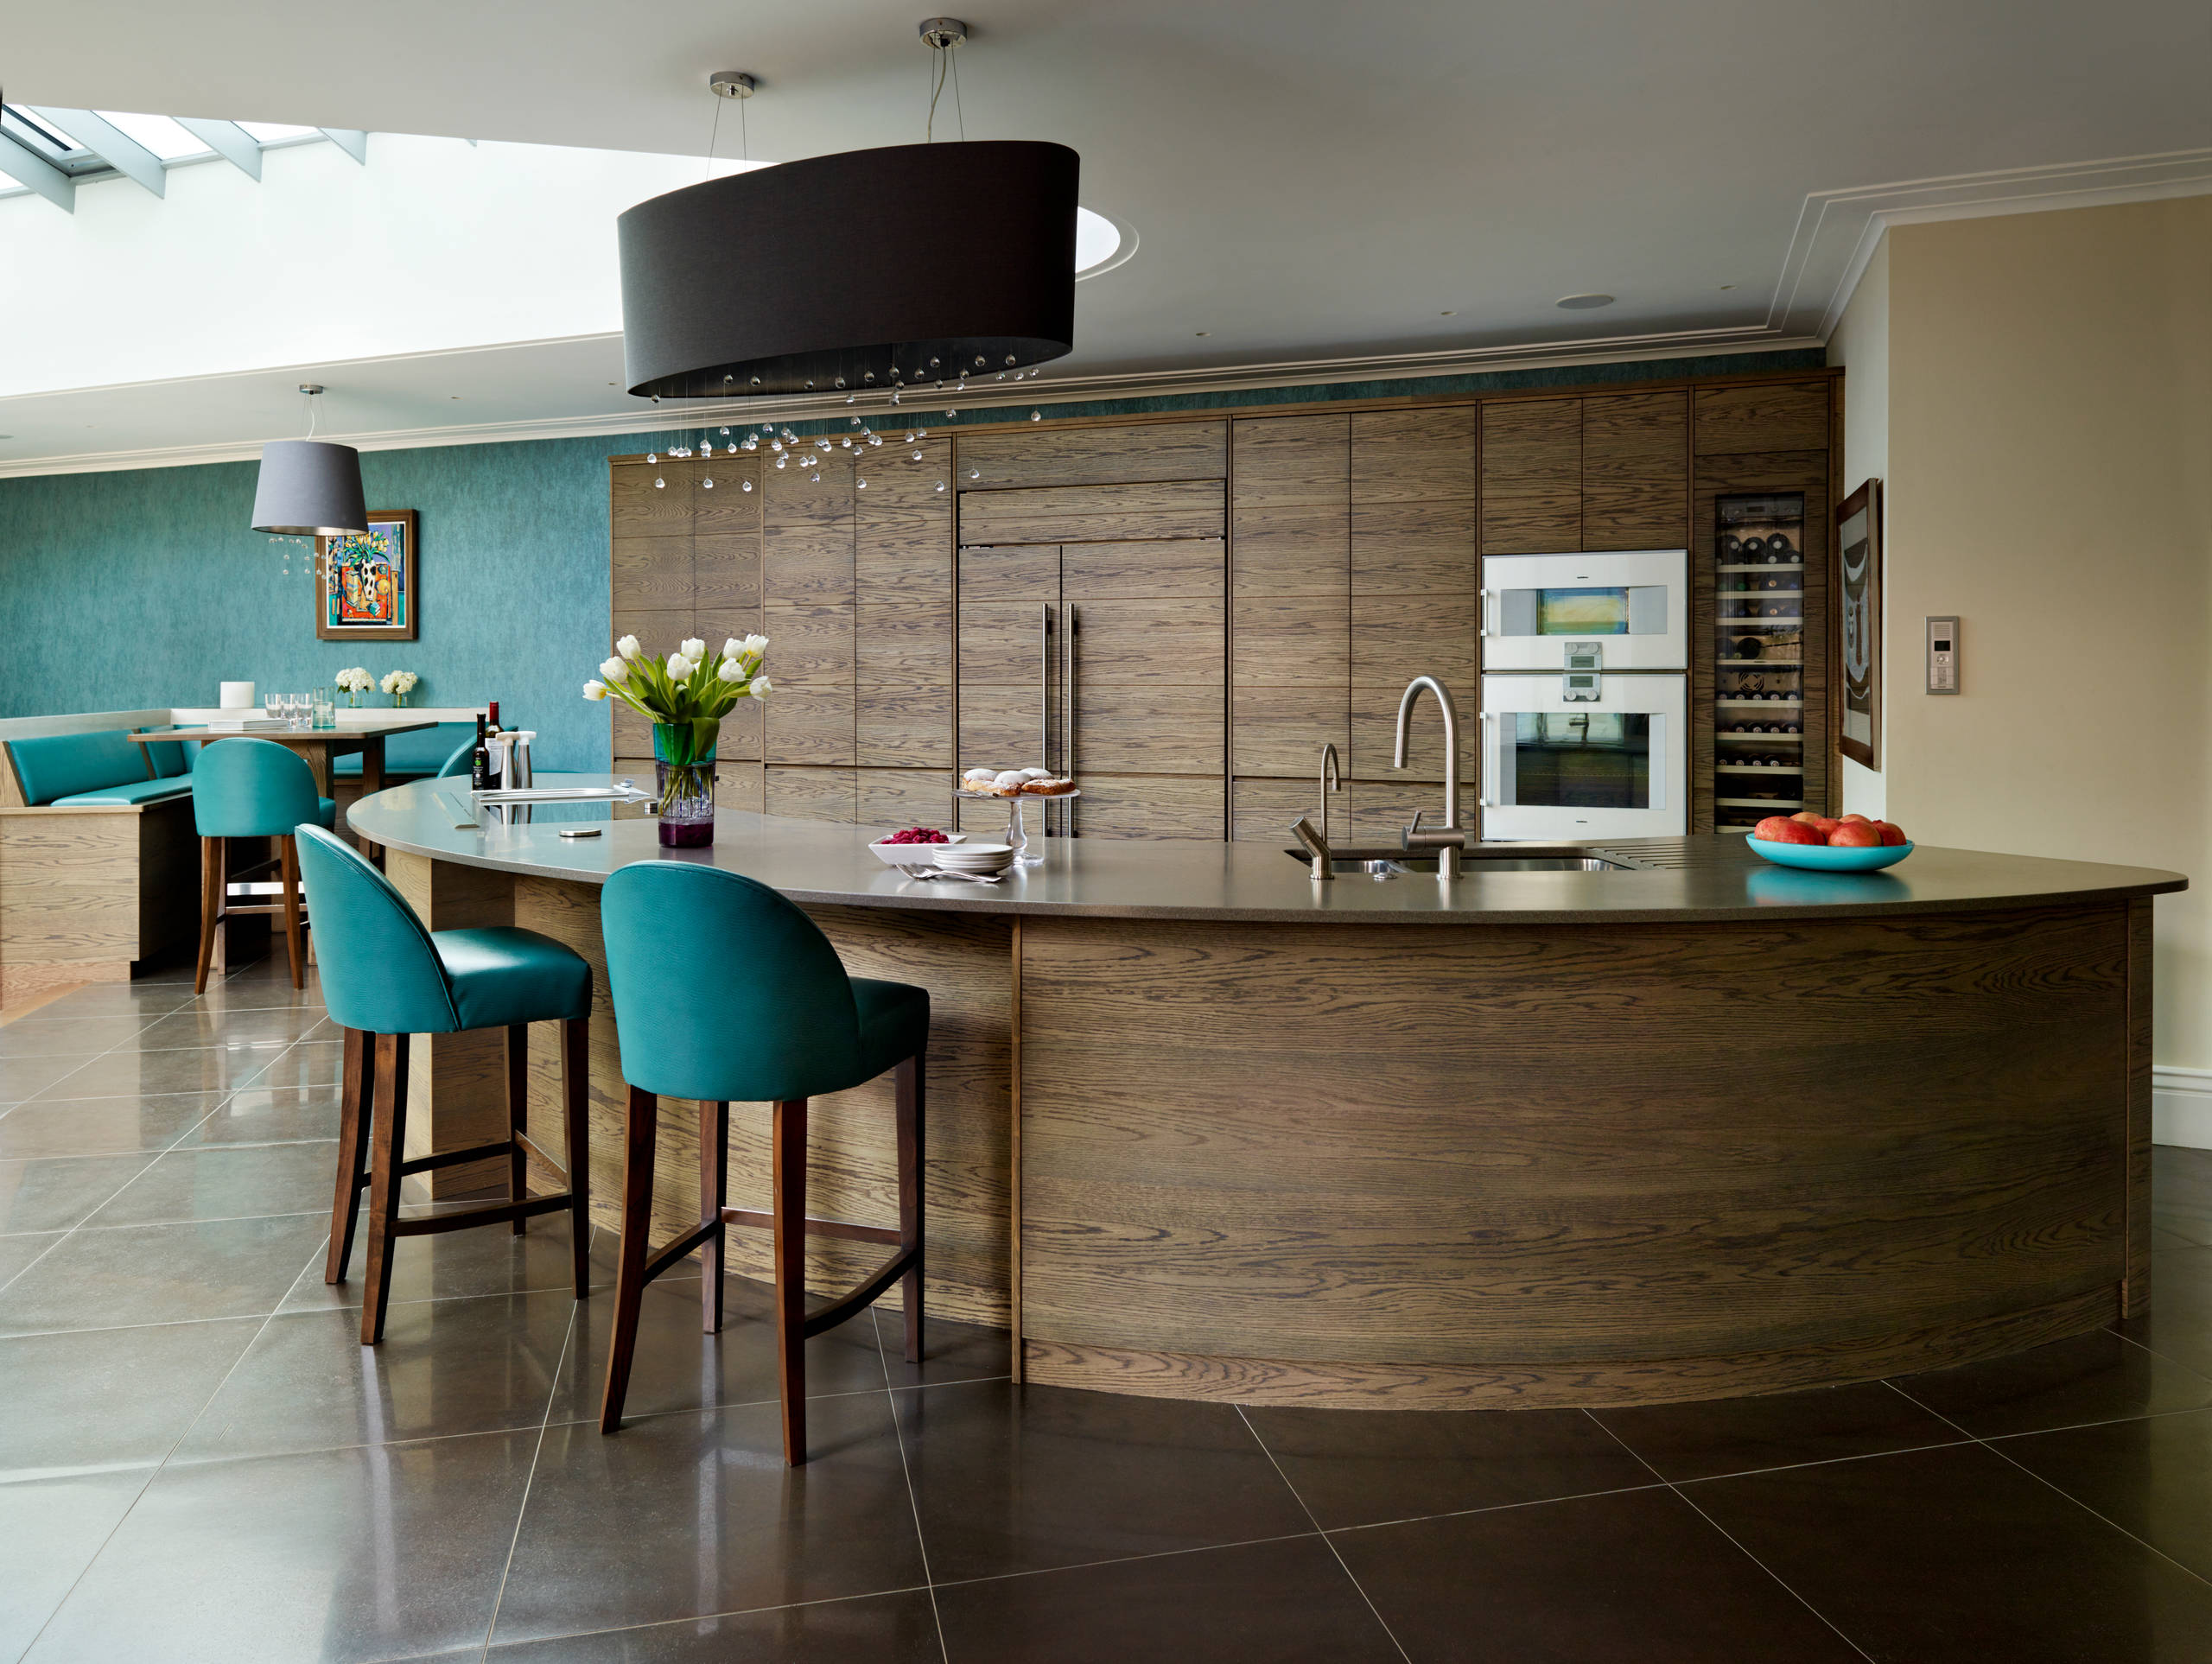 12 Kitchens That Work With Curves | Houzz UK